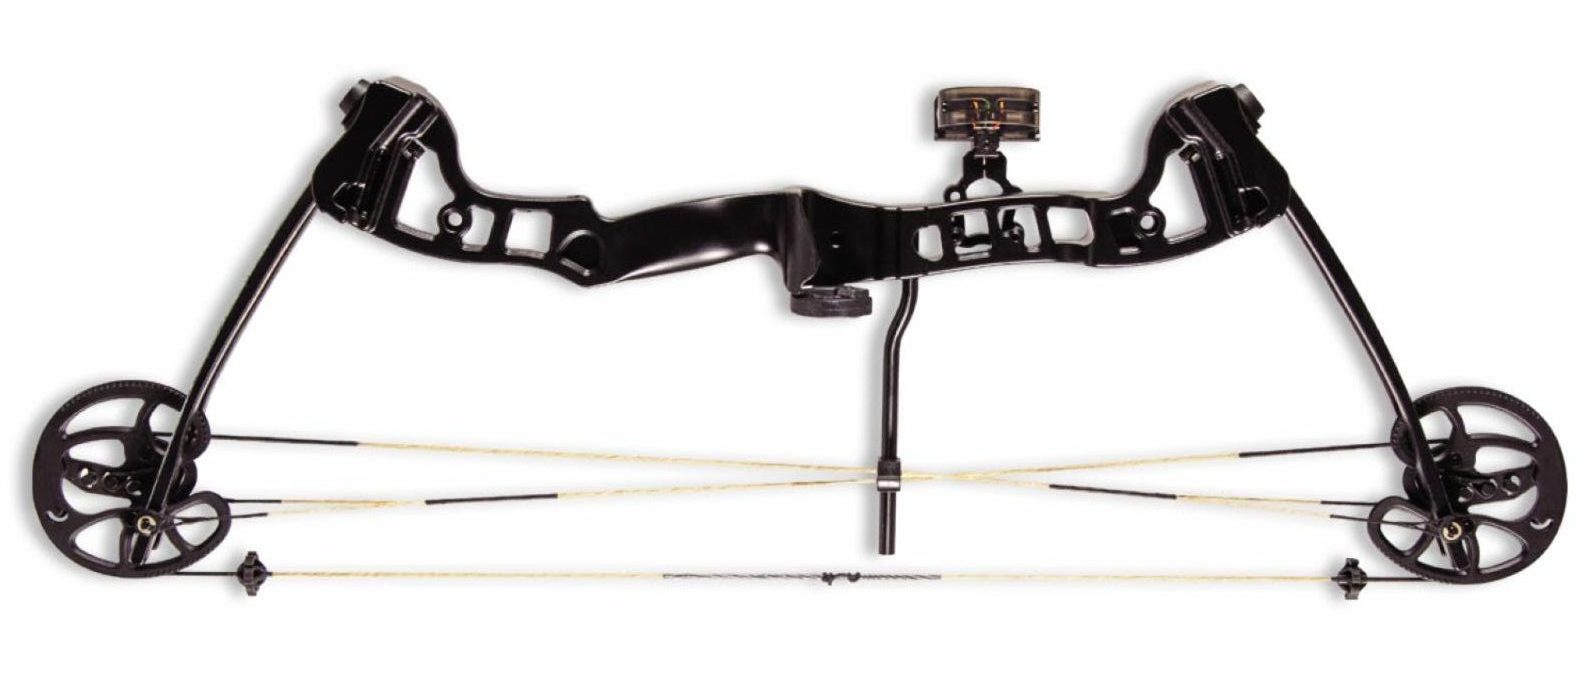 Barnett Youth Bows - The Perfect Christmas Gift for the Young Hunter